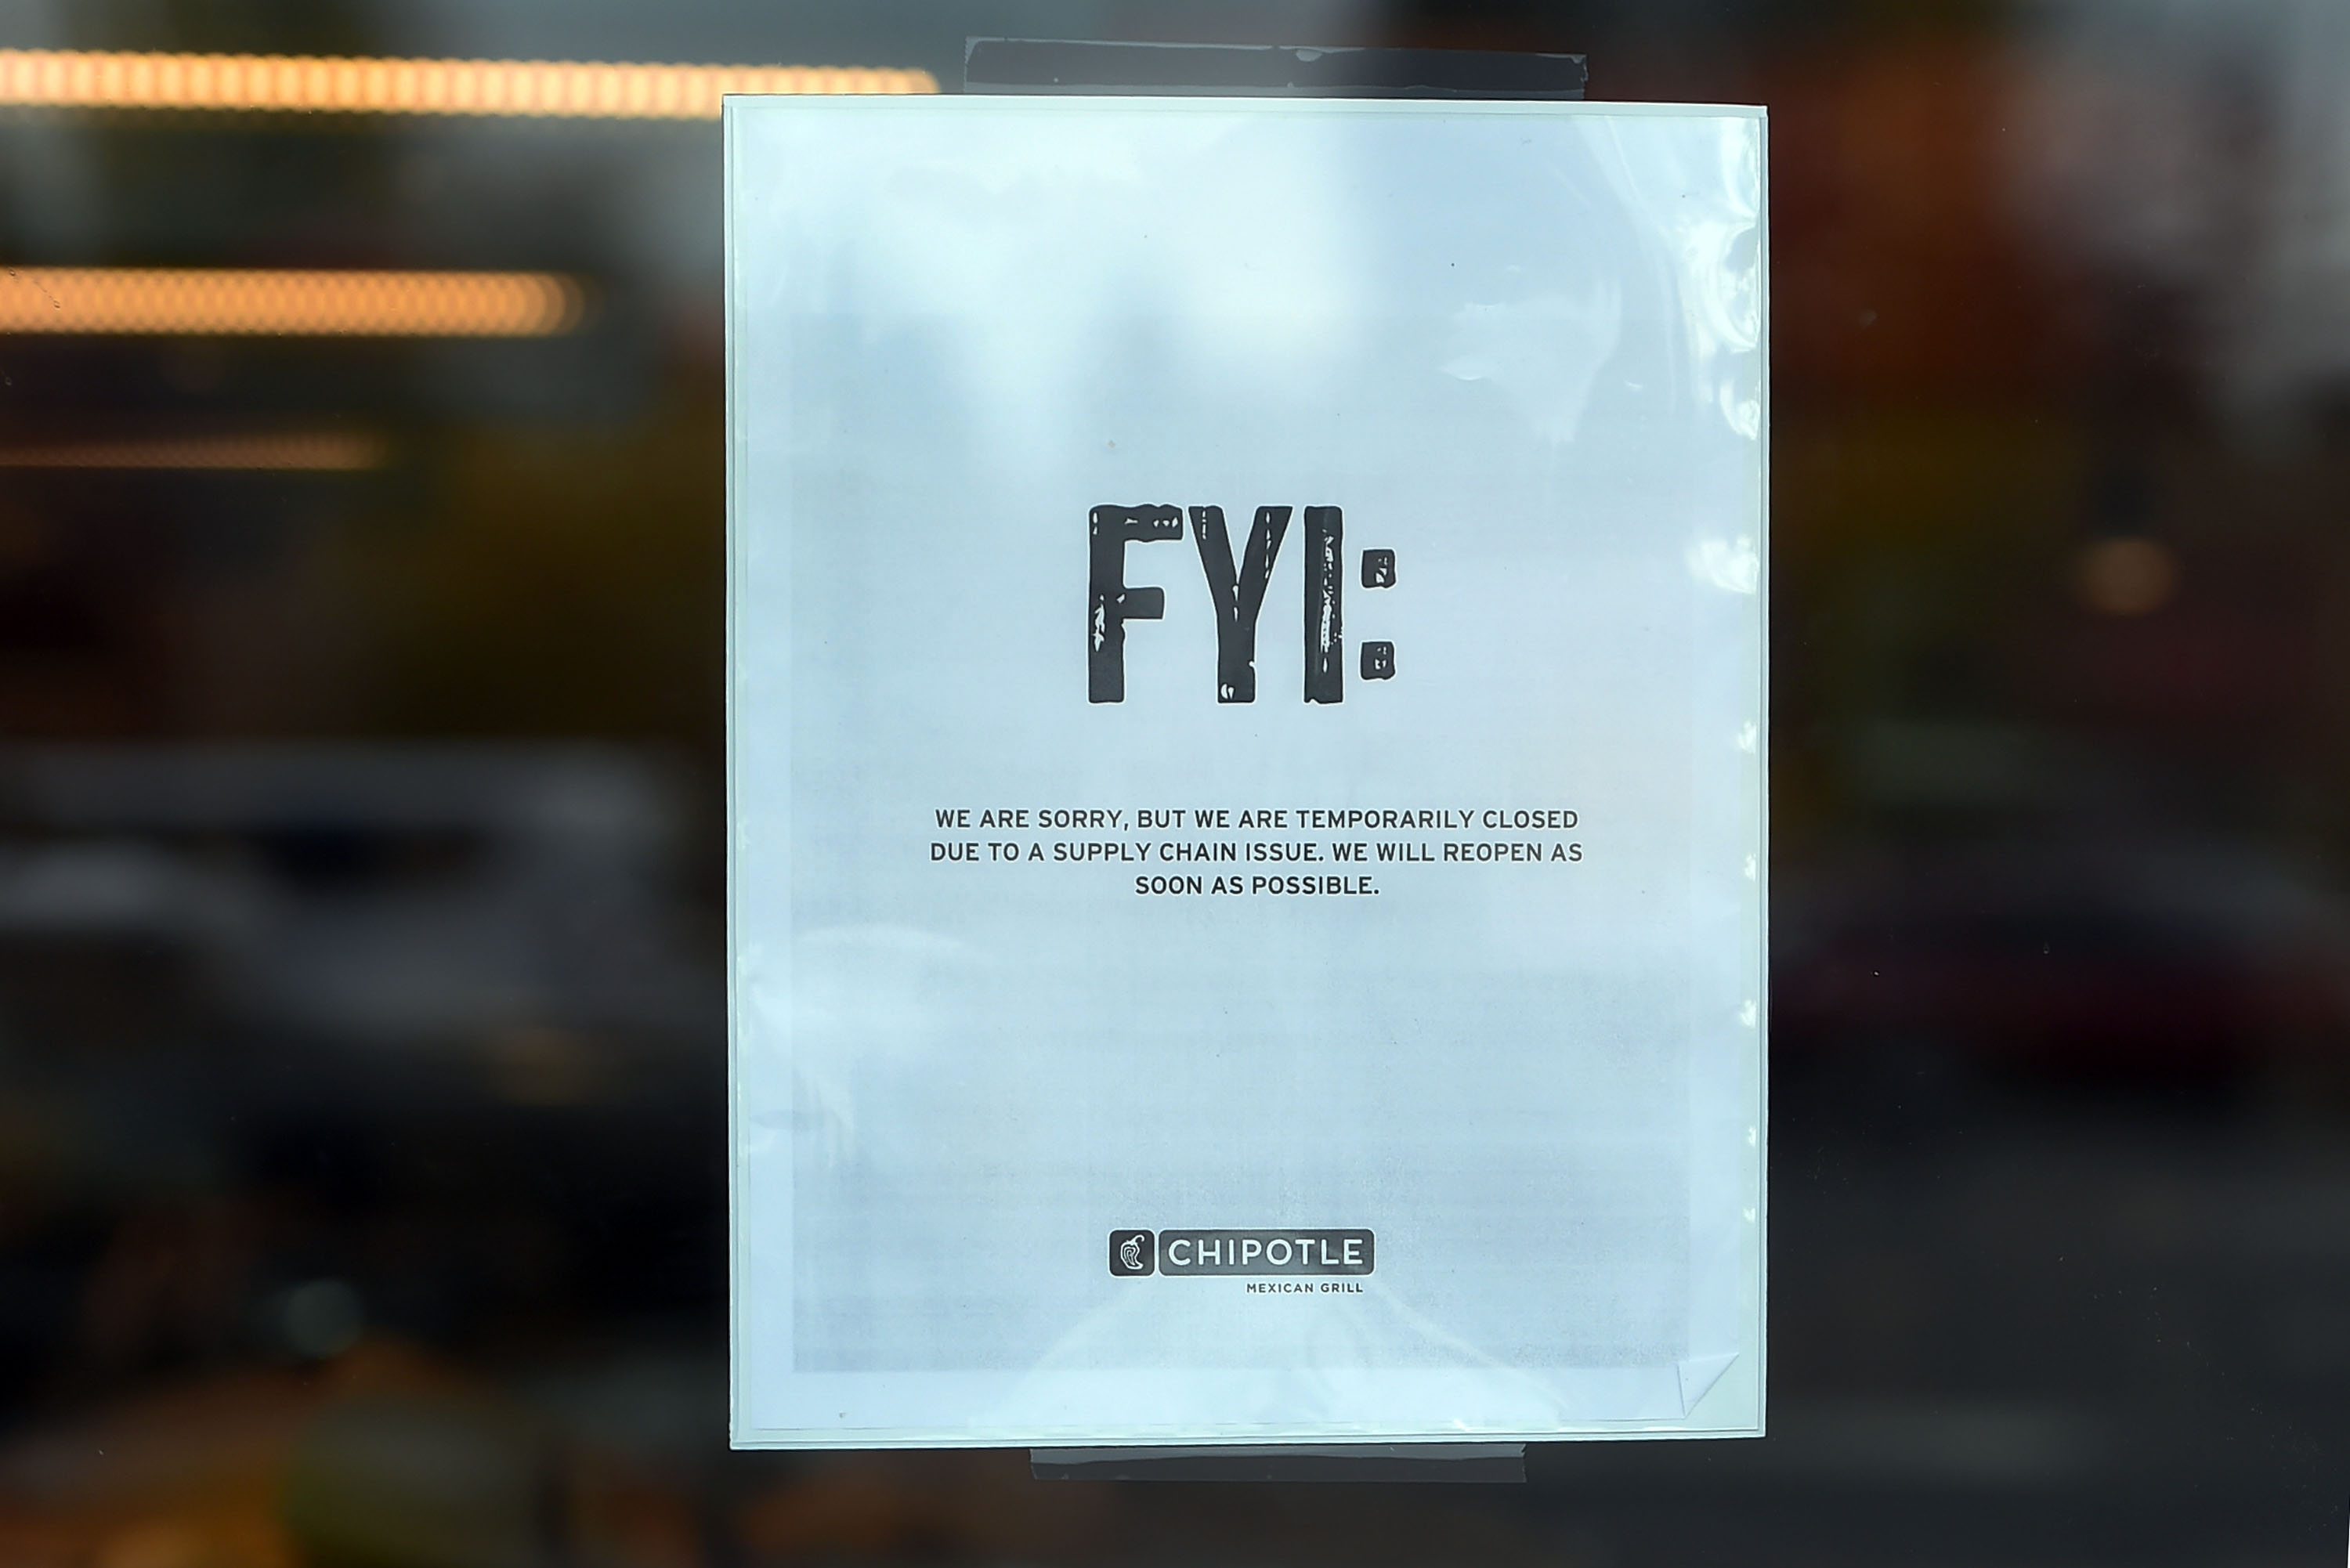 A sign hangs on the door of a Chipotle Mexican Grill store location in on November 3, 2015 in Vancouver, Washington.  Chipotle Mexican Grill is temporarily closing more than 40 restaurants in and around Washignton and Oregon, as health officials investigate an E. coli outbreak. (Steve Dykes&mdash;Getty Images)